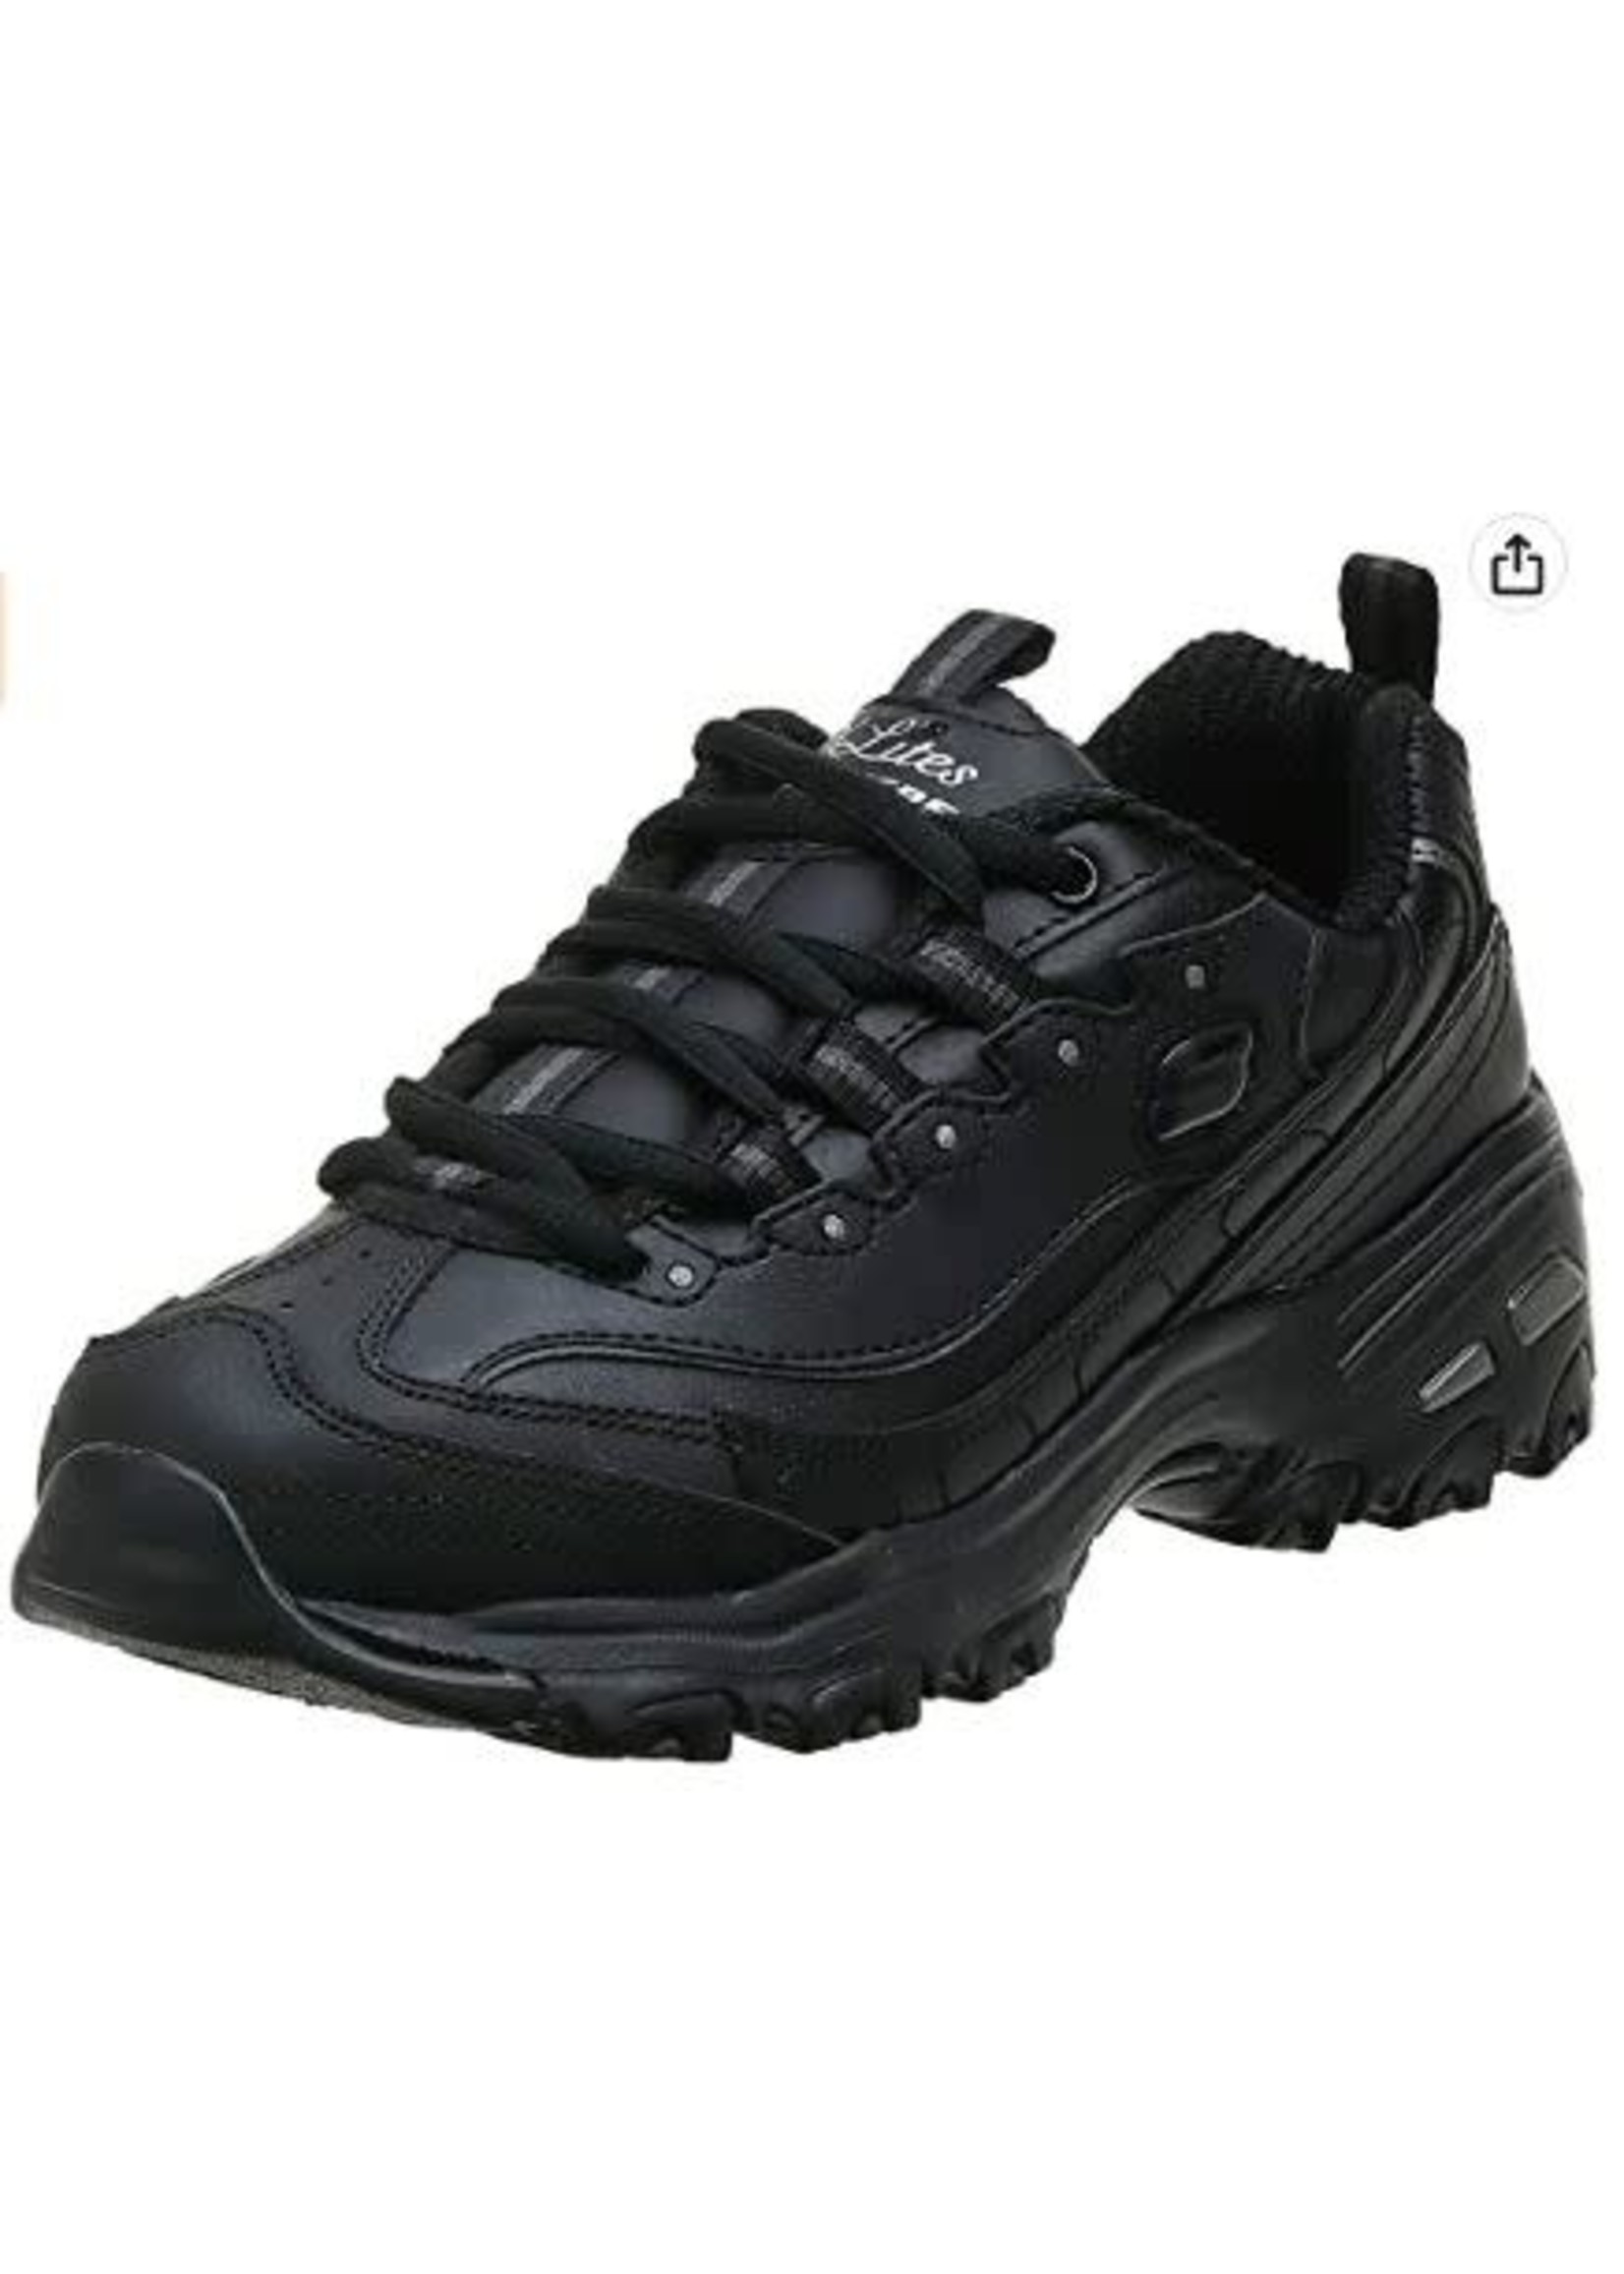 Skechers D'Lites -Fresh Start - Black - SHOE PLUS - Low Prices - Express  Shipping - 100s of Items to Choose From!